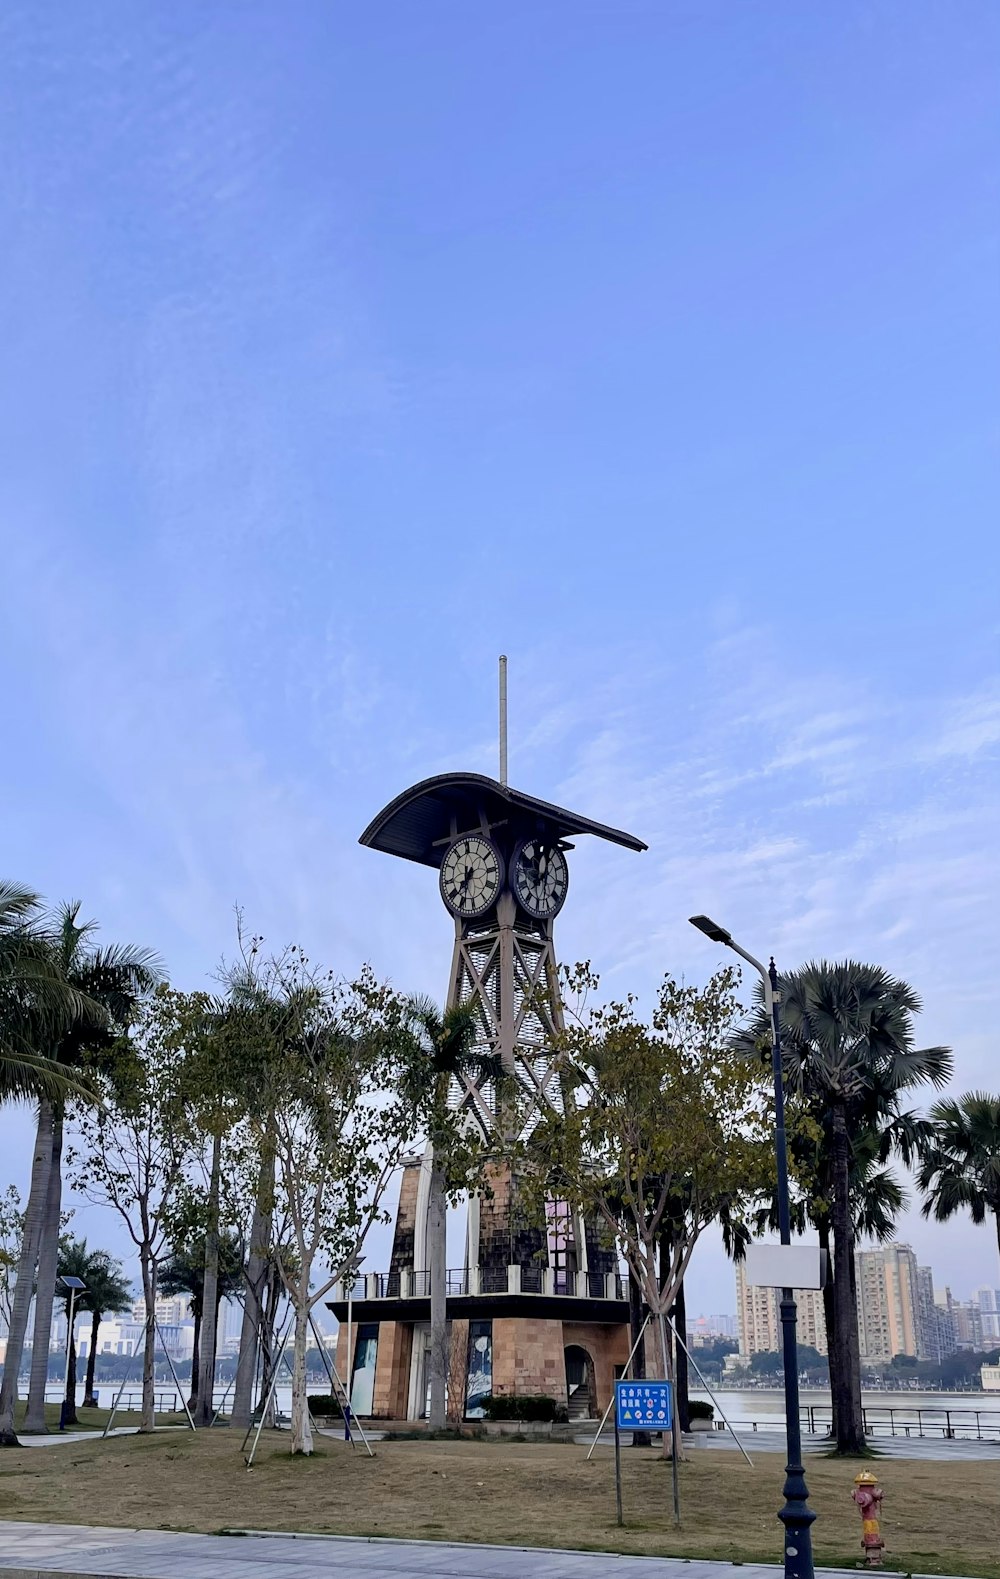 a clock tower in a park